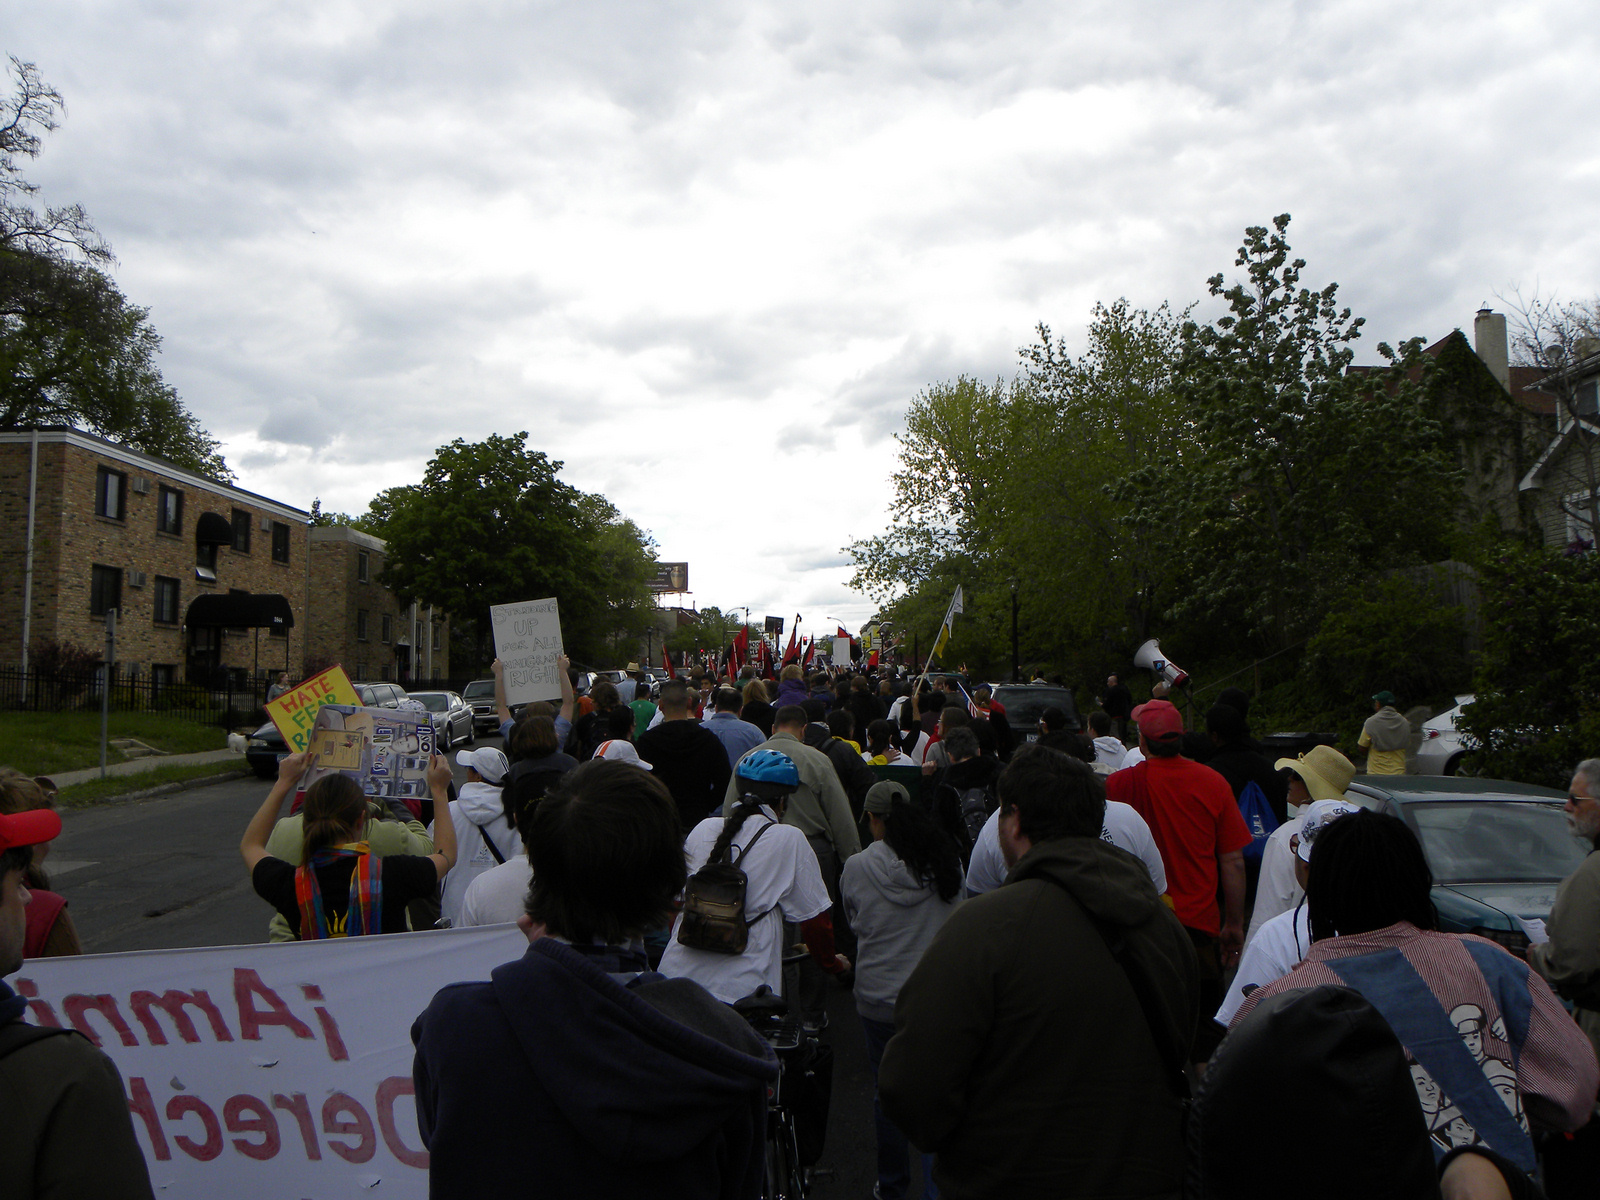 a group of people in the street are holding up signs